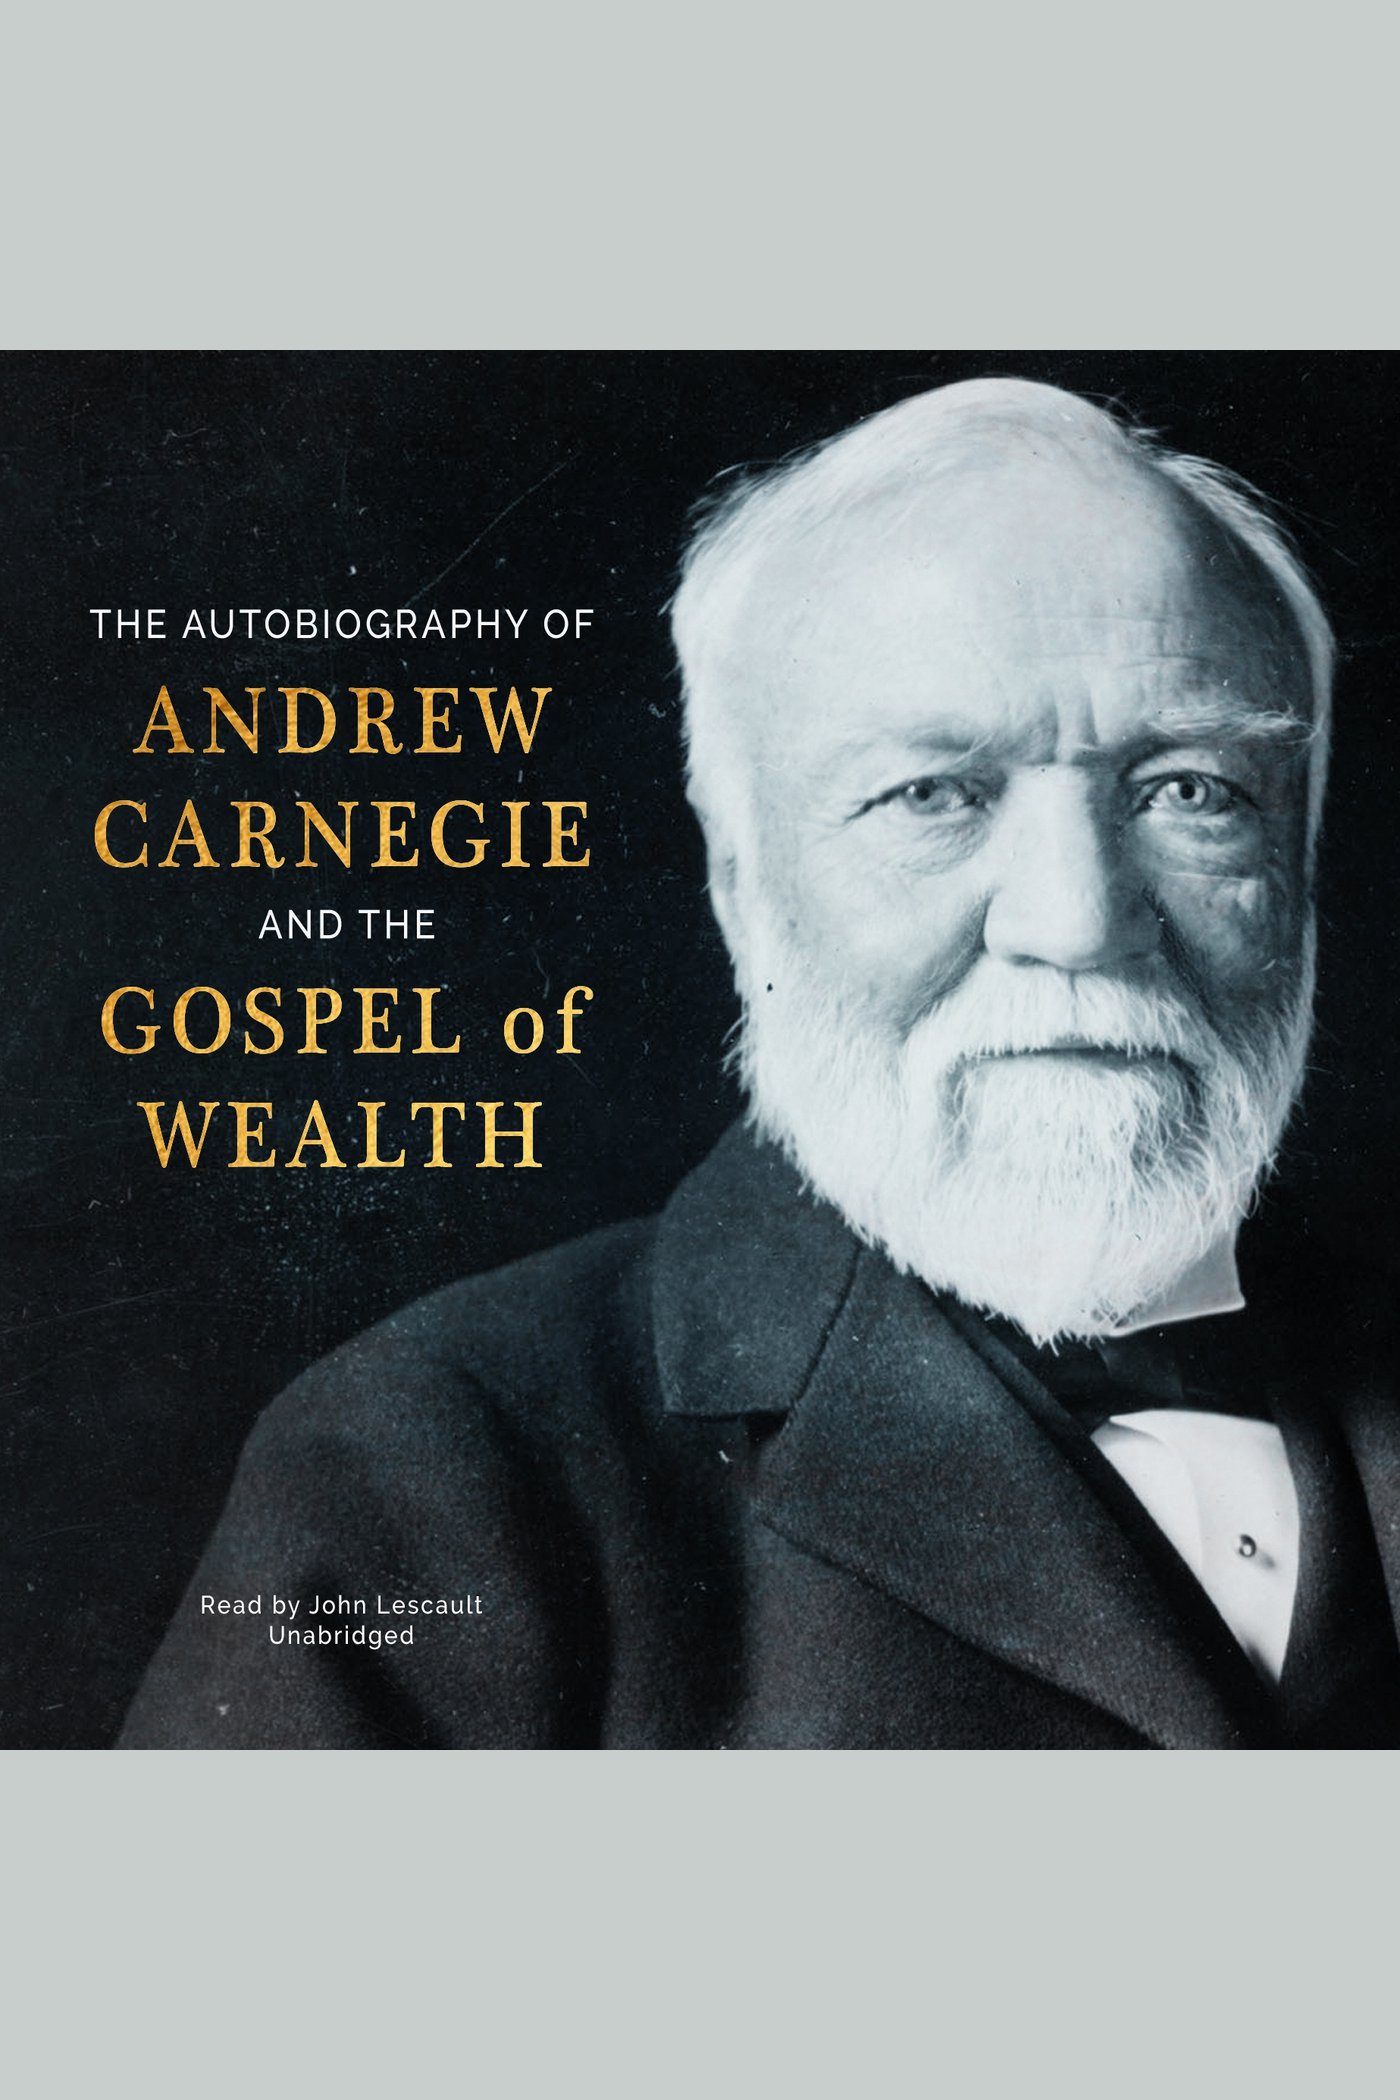 The Autobiography of Andrew Carnegie and The Gospel of Wealth cover image